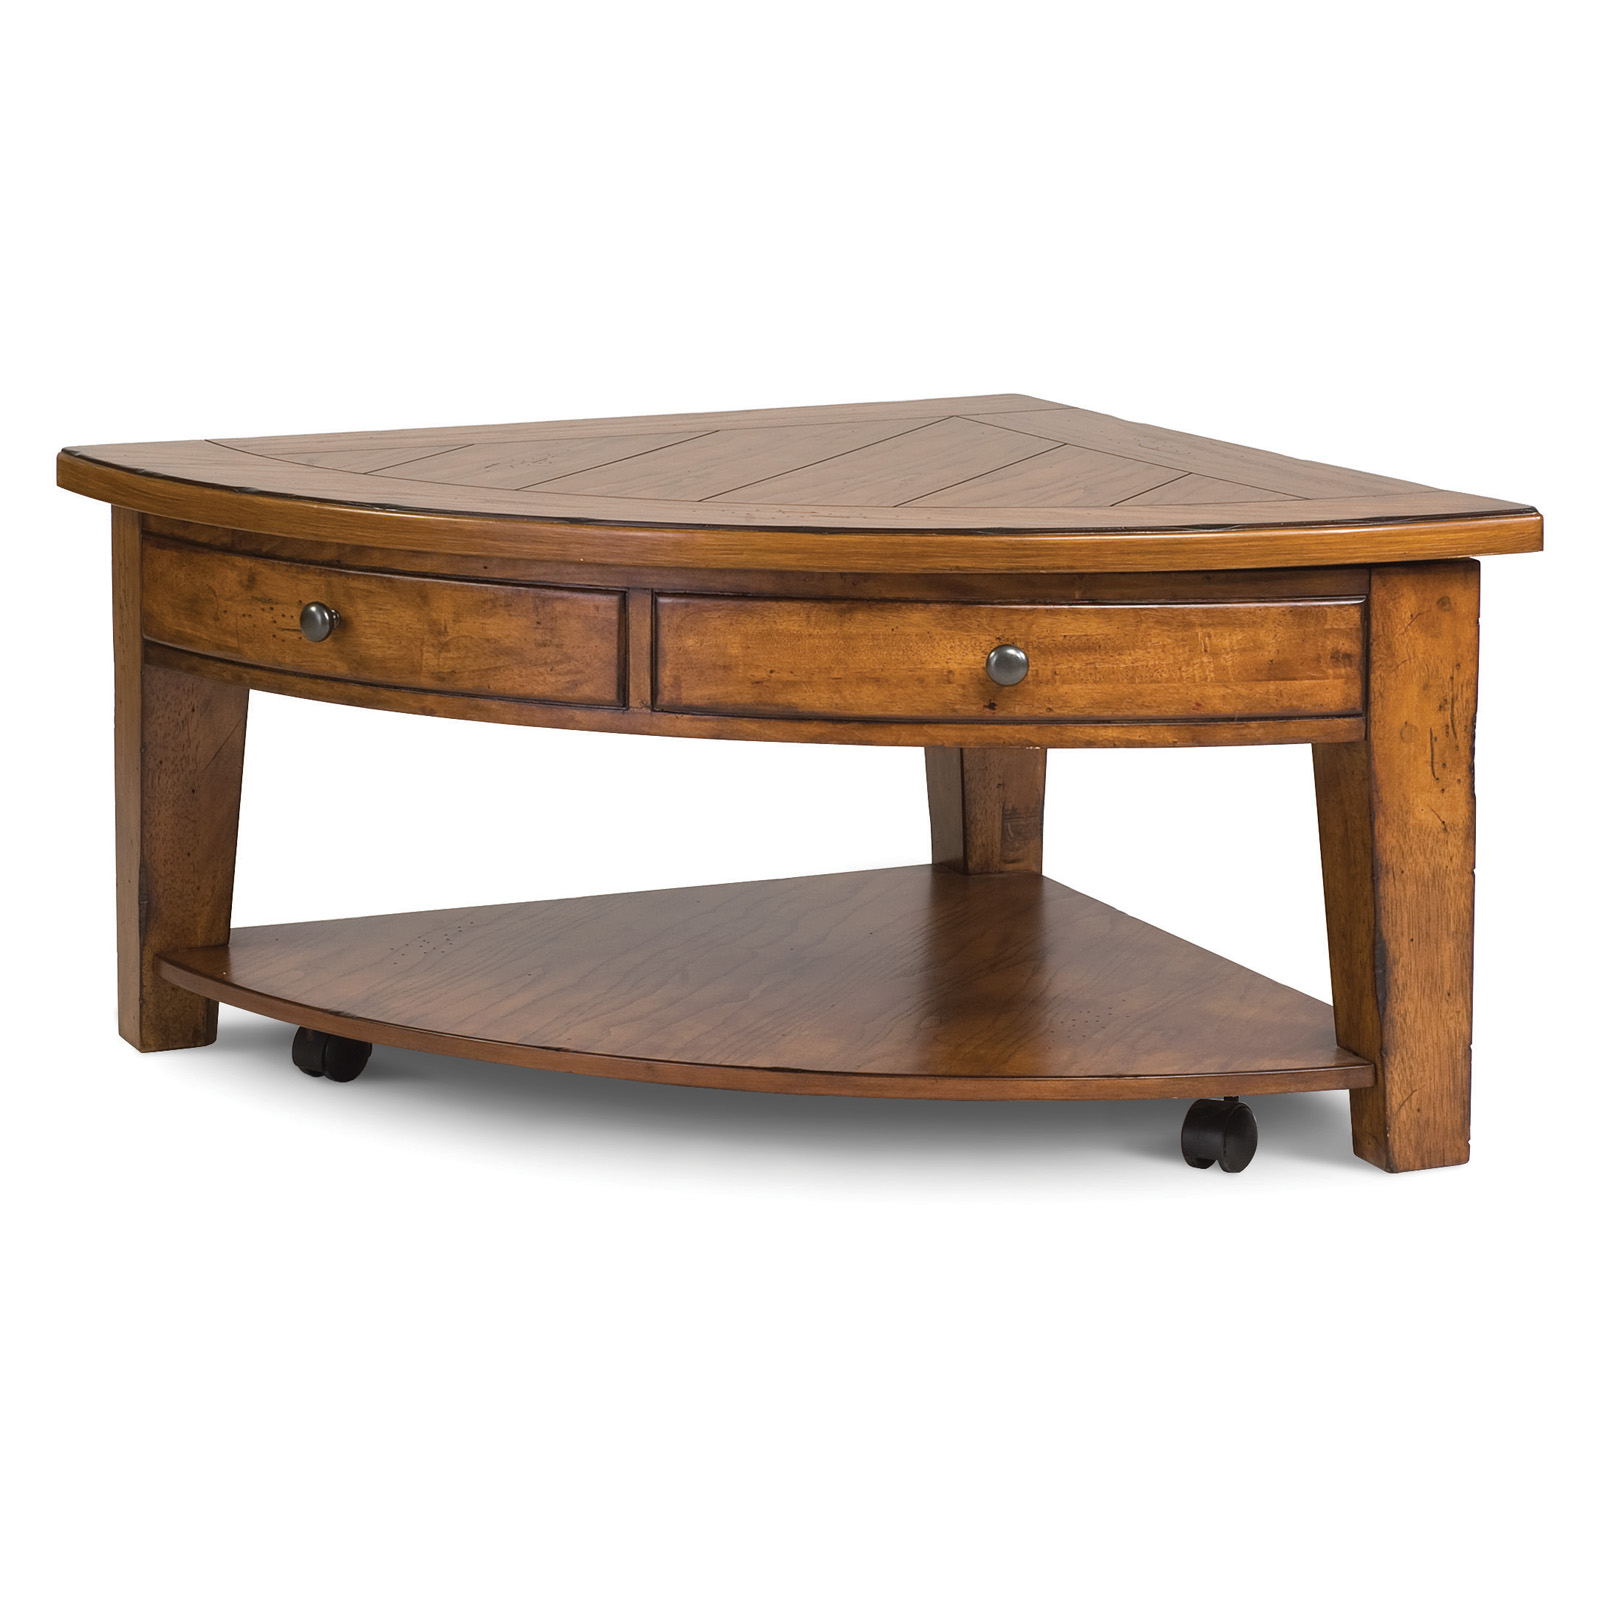 Magnussen T1367 65 Savannah Pie Shaped Lift Top Coffee Table Traditional Coffee Tables